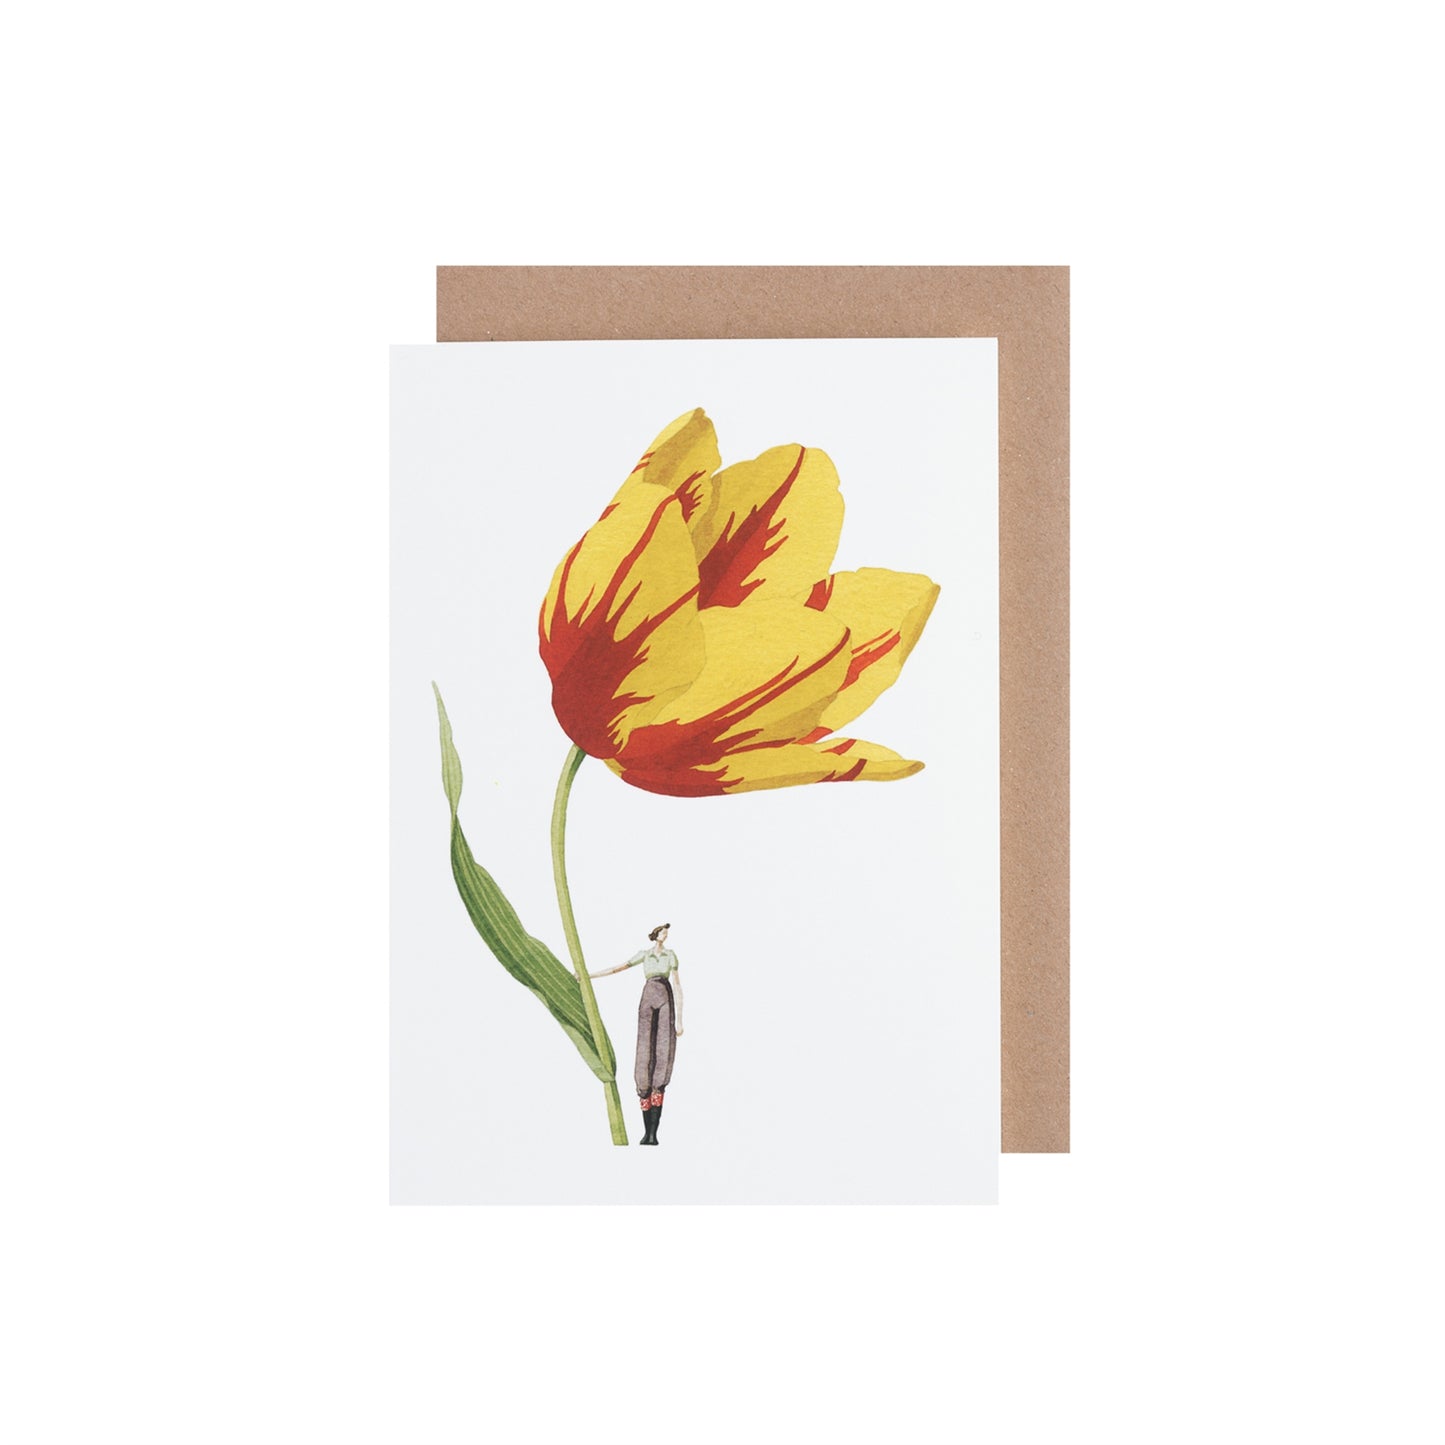 The drawing of a gigantic red and yellow tulip standing next a to woman holding it up by the steam.